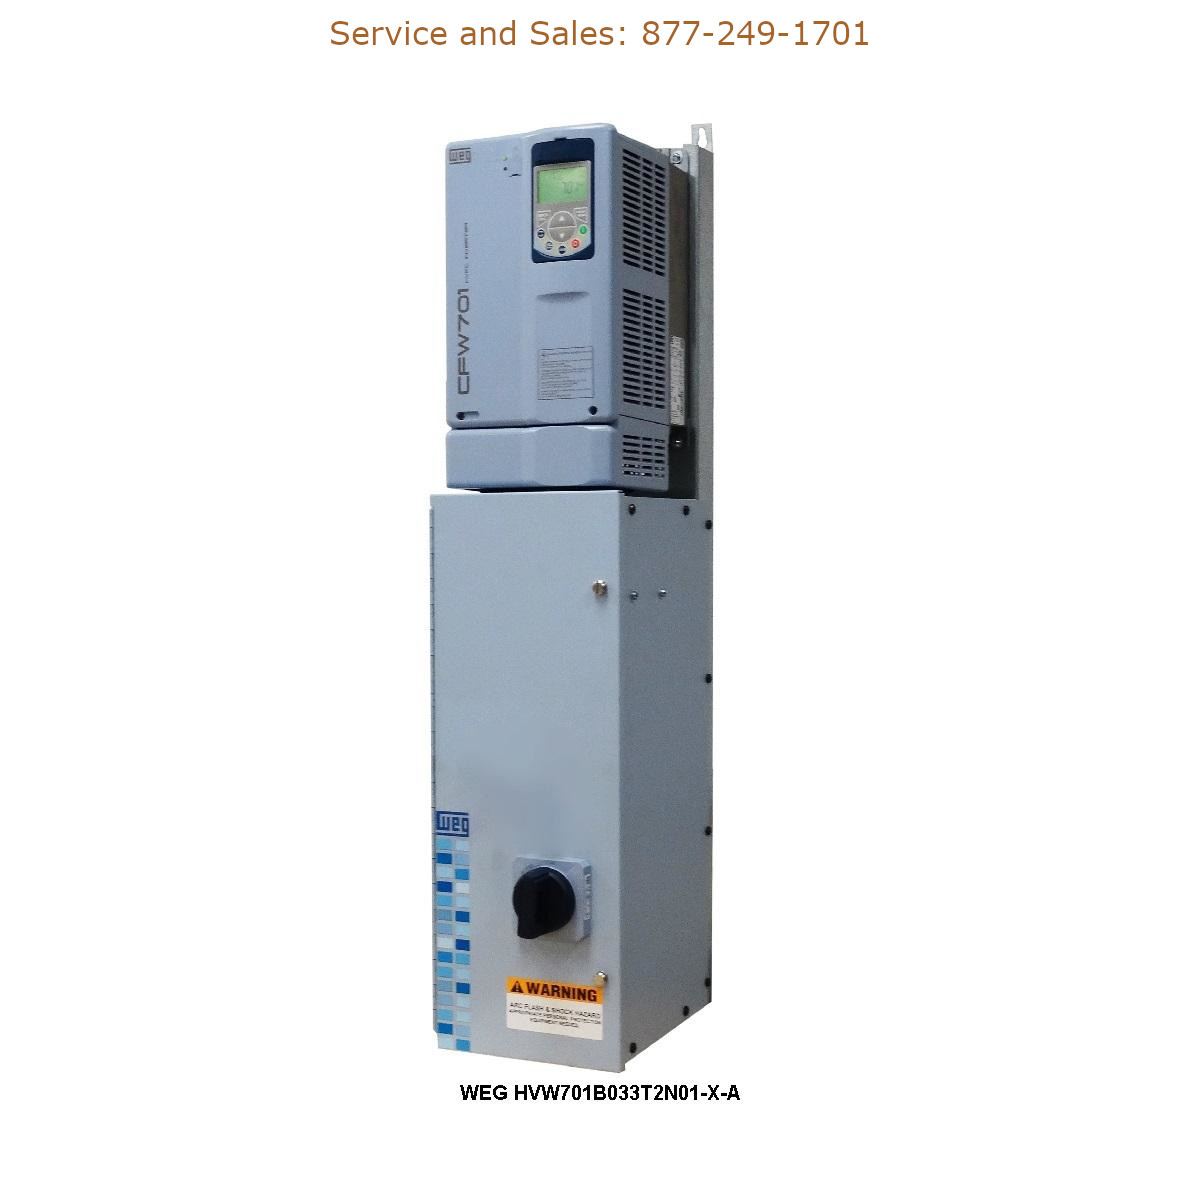 WEG HVW701B033T2N01-X-A WEG Model Number HVW701B033T2N01-X-A WEG Drives, Variable Speed Drives Repair Service, Troubleshooting, Replacement Parts https://gesrepair.com/wp-content/uploads/2022/WEG/WEG_HVW701B033T2N01-X-A_Drives_Variable_Speed_Drives.jpg